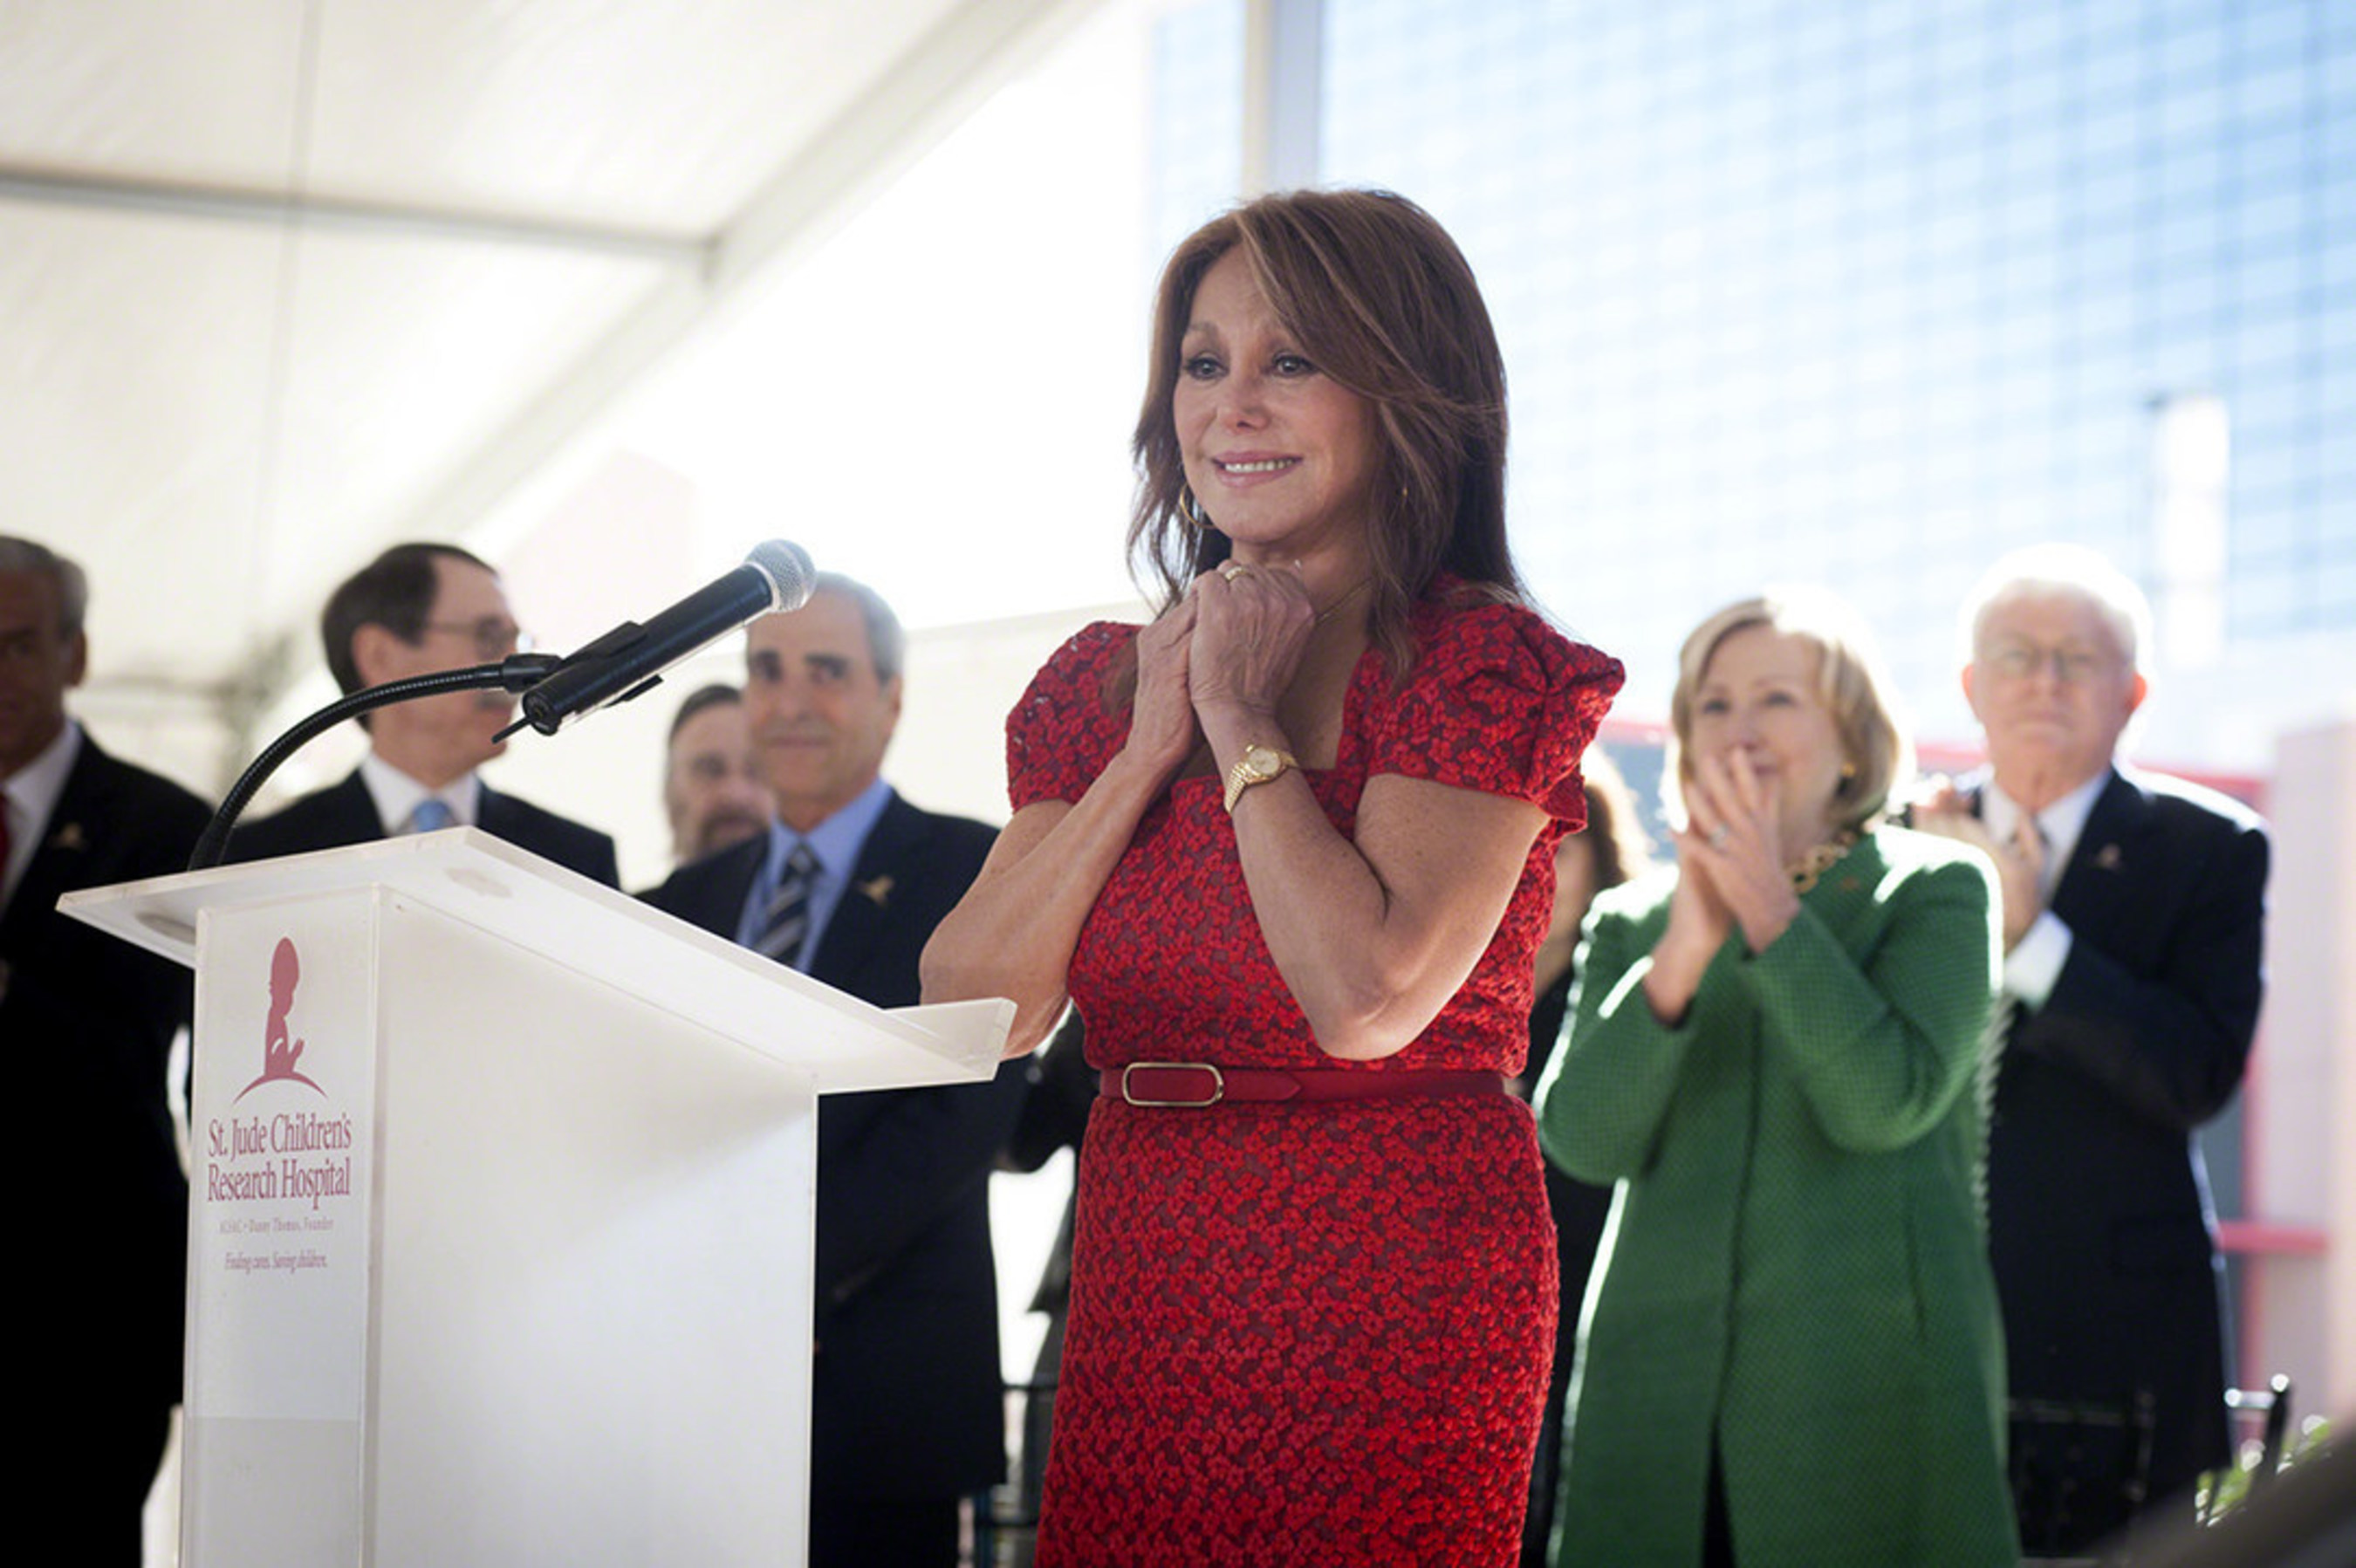 Marlo Thomas, National Outreach Director for St. Jude Children's Research Hospital, celebrated the dedication ceremony of the new Marlo Thomas Center for Global Education and Collaboration on the St. Jude campus. Ms. Thomas was joined by family, friends, patients and former United States Secretary of State Hillary Rodham Clinton. The new facility will become the hub for the St. Jude International Outreach Program, which aims to improve childhood cancer survival rates worldwide through 25 official partner...